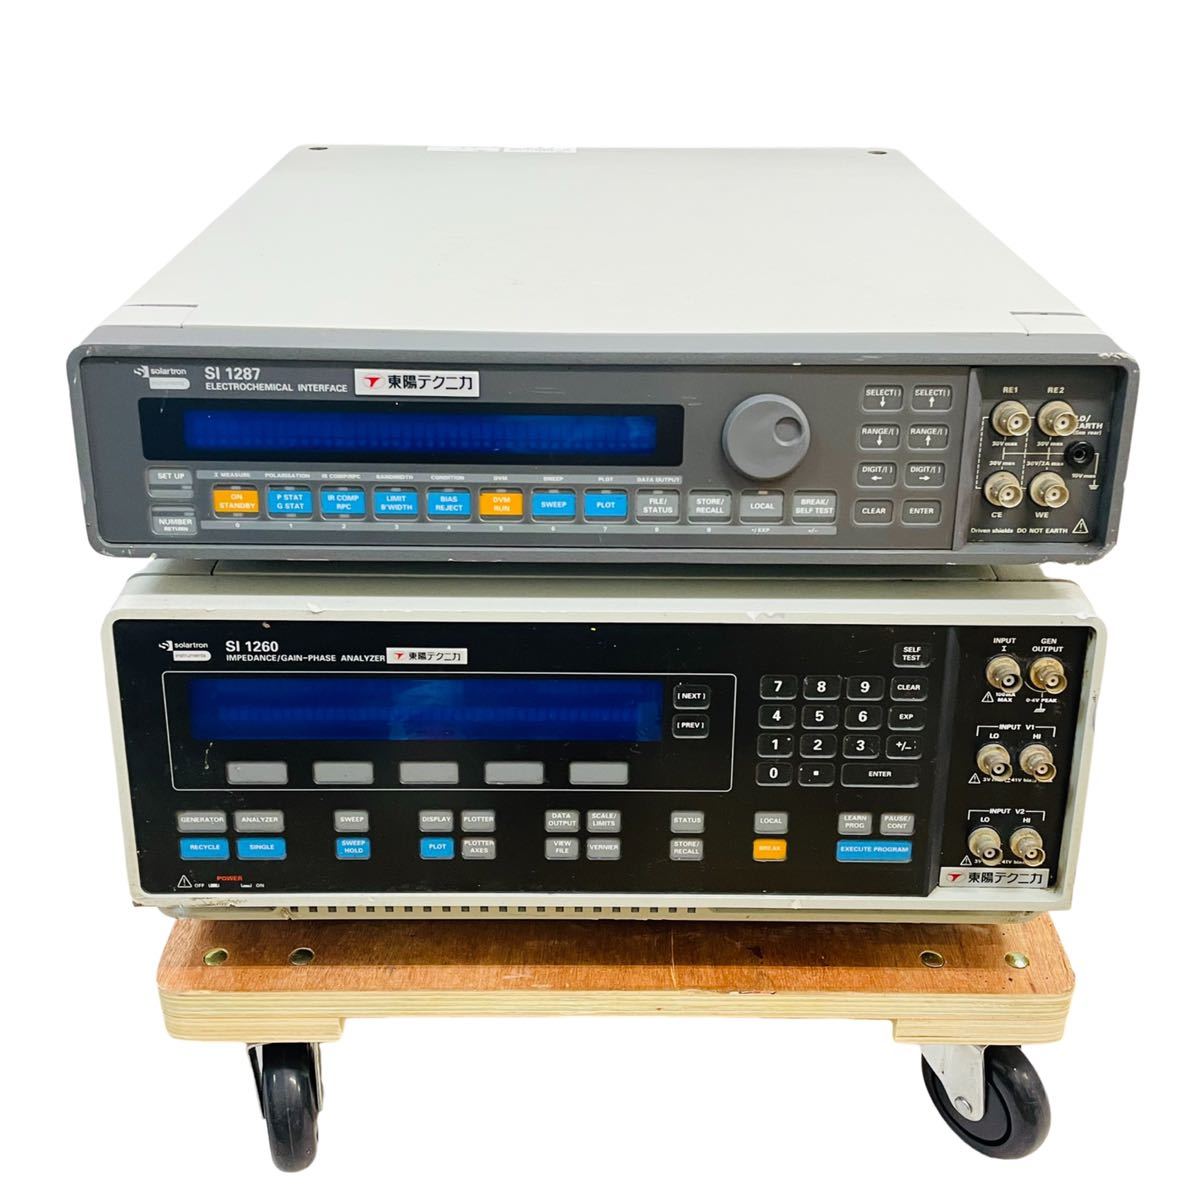 SOLARTRON SI 1260 IMPEDANCE/GAIN-PHASE ANALYZER+SI 1287 ELECTROCHEMICAL INTERFACE（7）_画像1